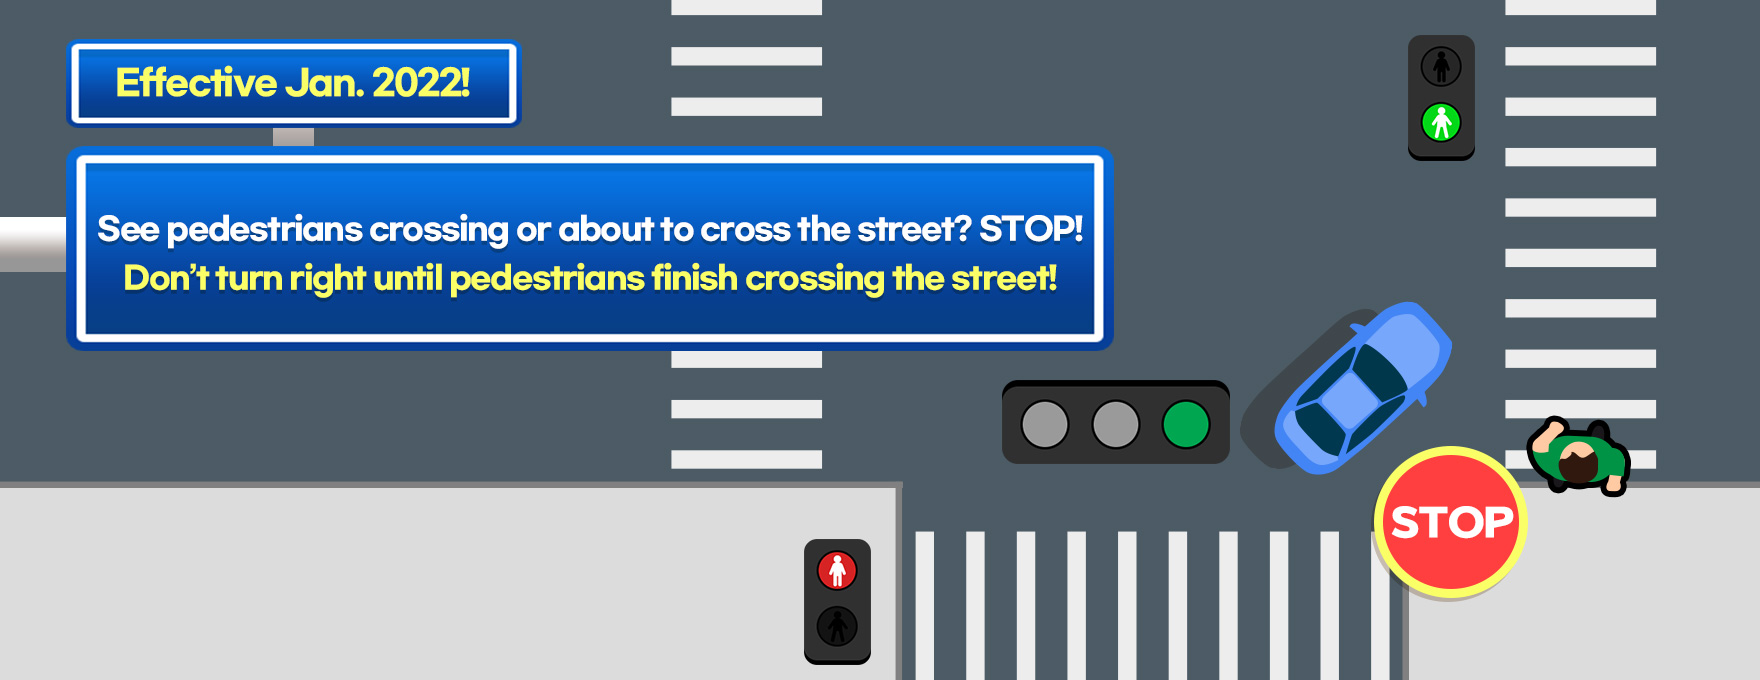 See pedestrians crossing or about th cross the street? STOP!